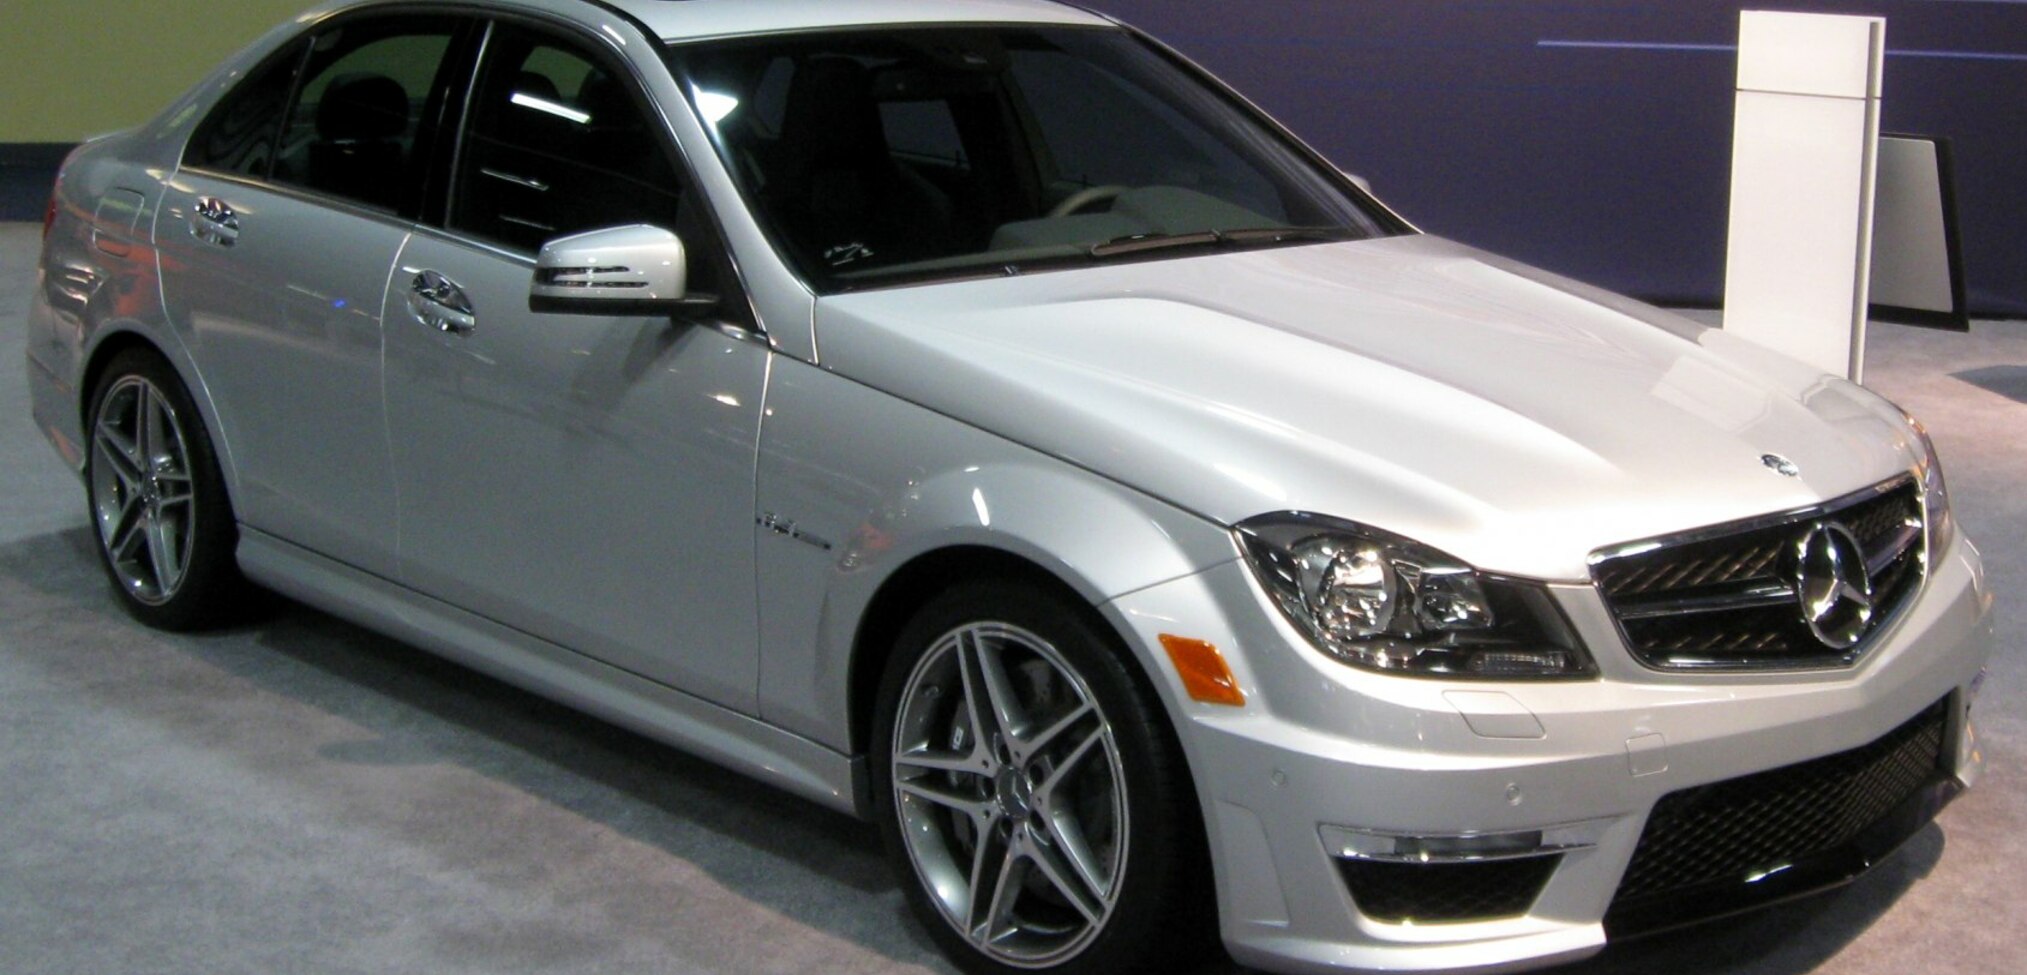 Mercedes C-Class Type W204 Limousine 6,2l C 63 AMG 358kW (487 hp) Wheels  and Tyre Packages